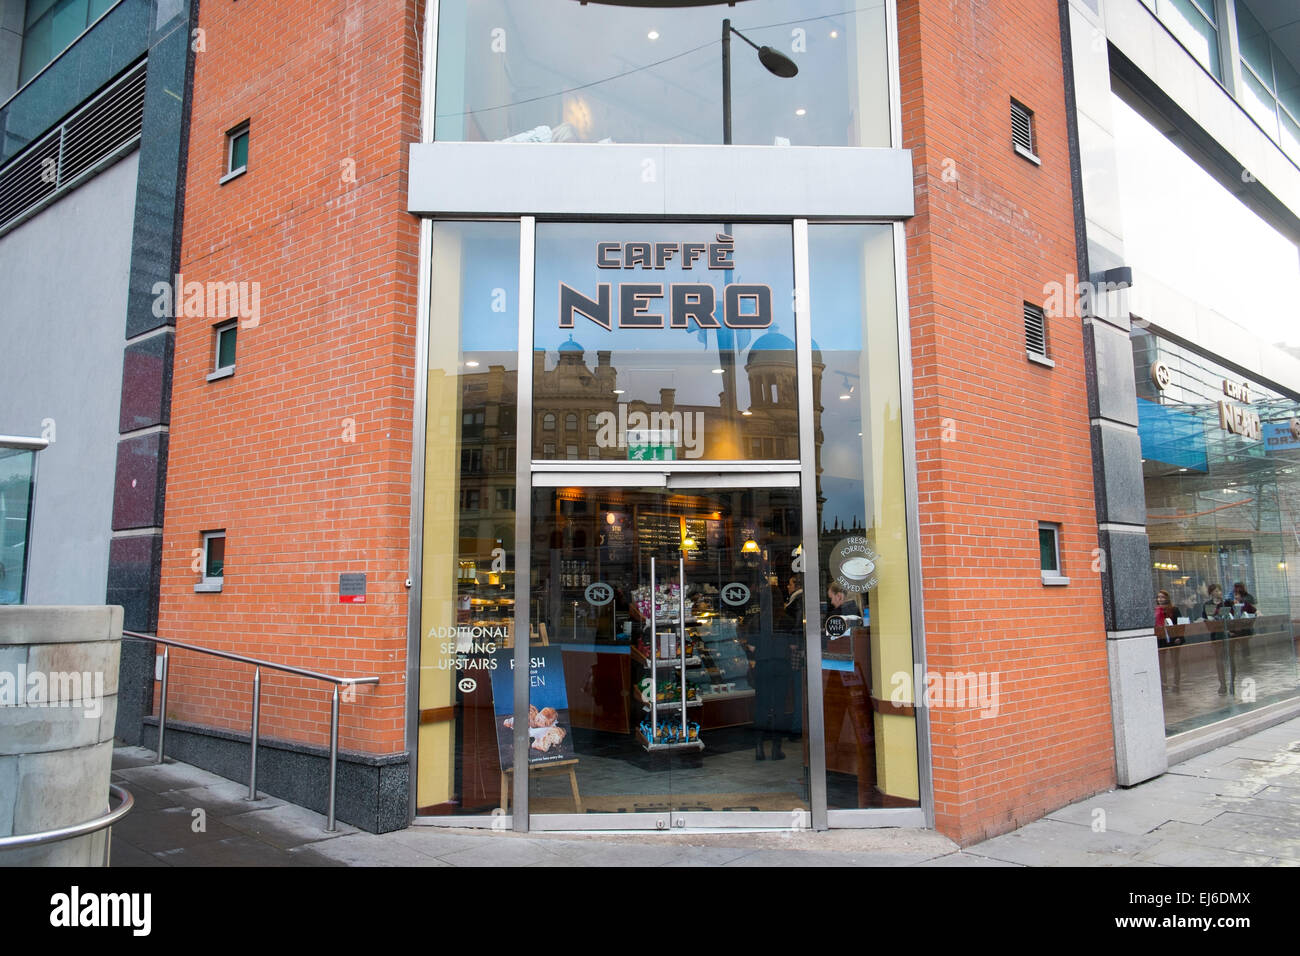 Caffe nero coffee tea shop store in Manchester England Stock Photo